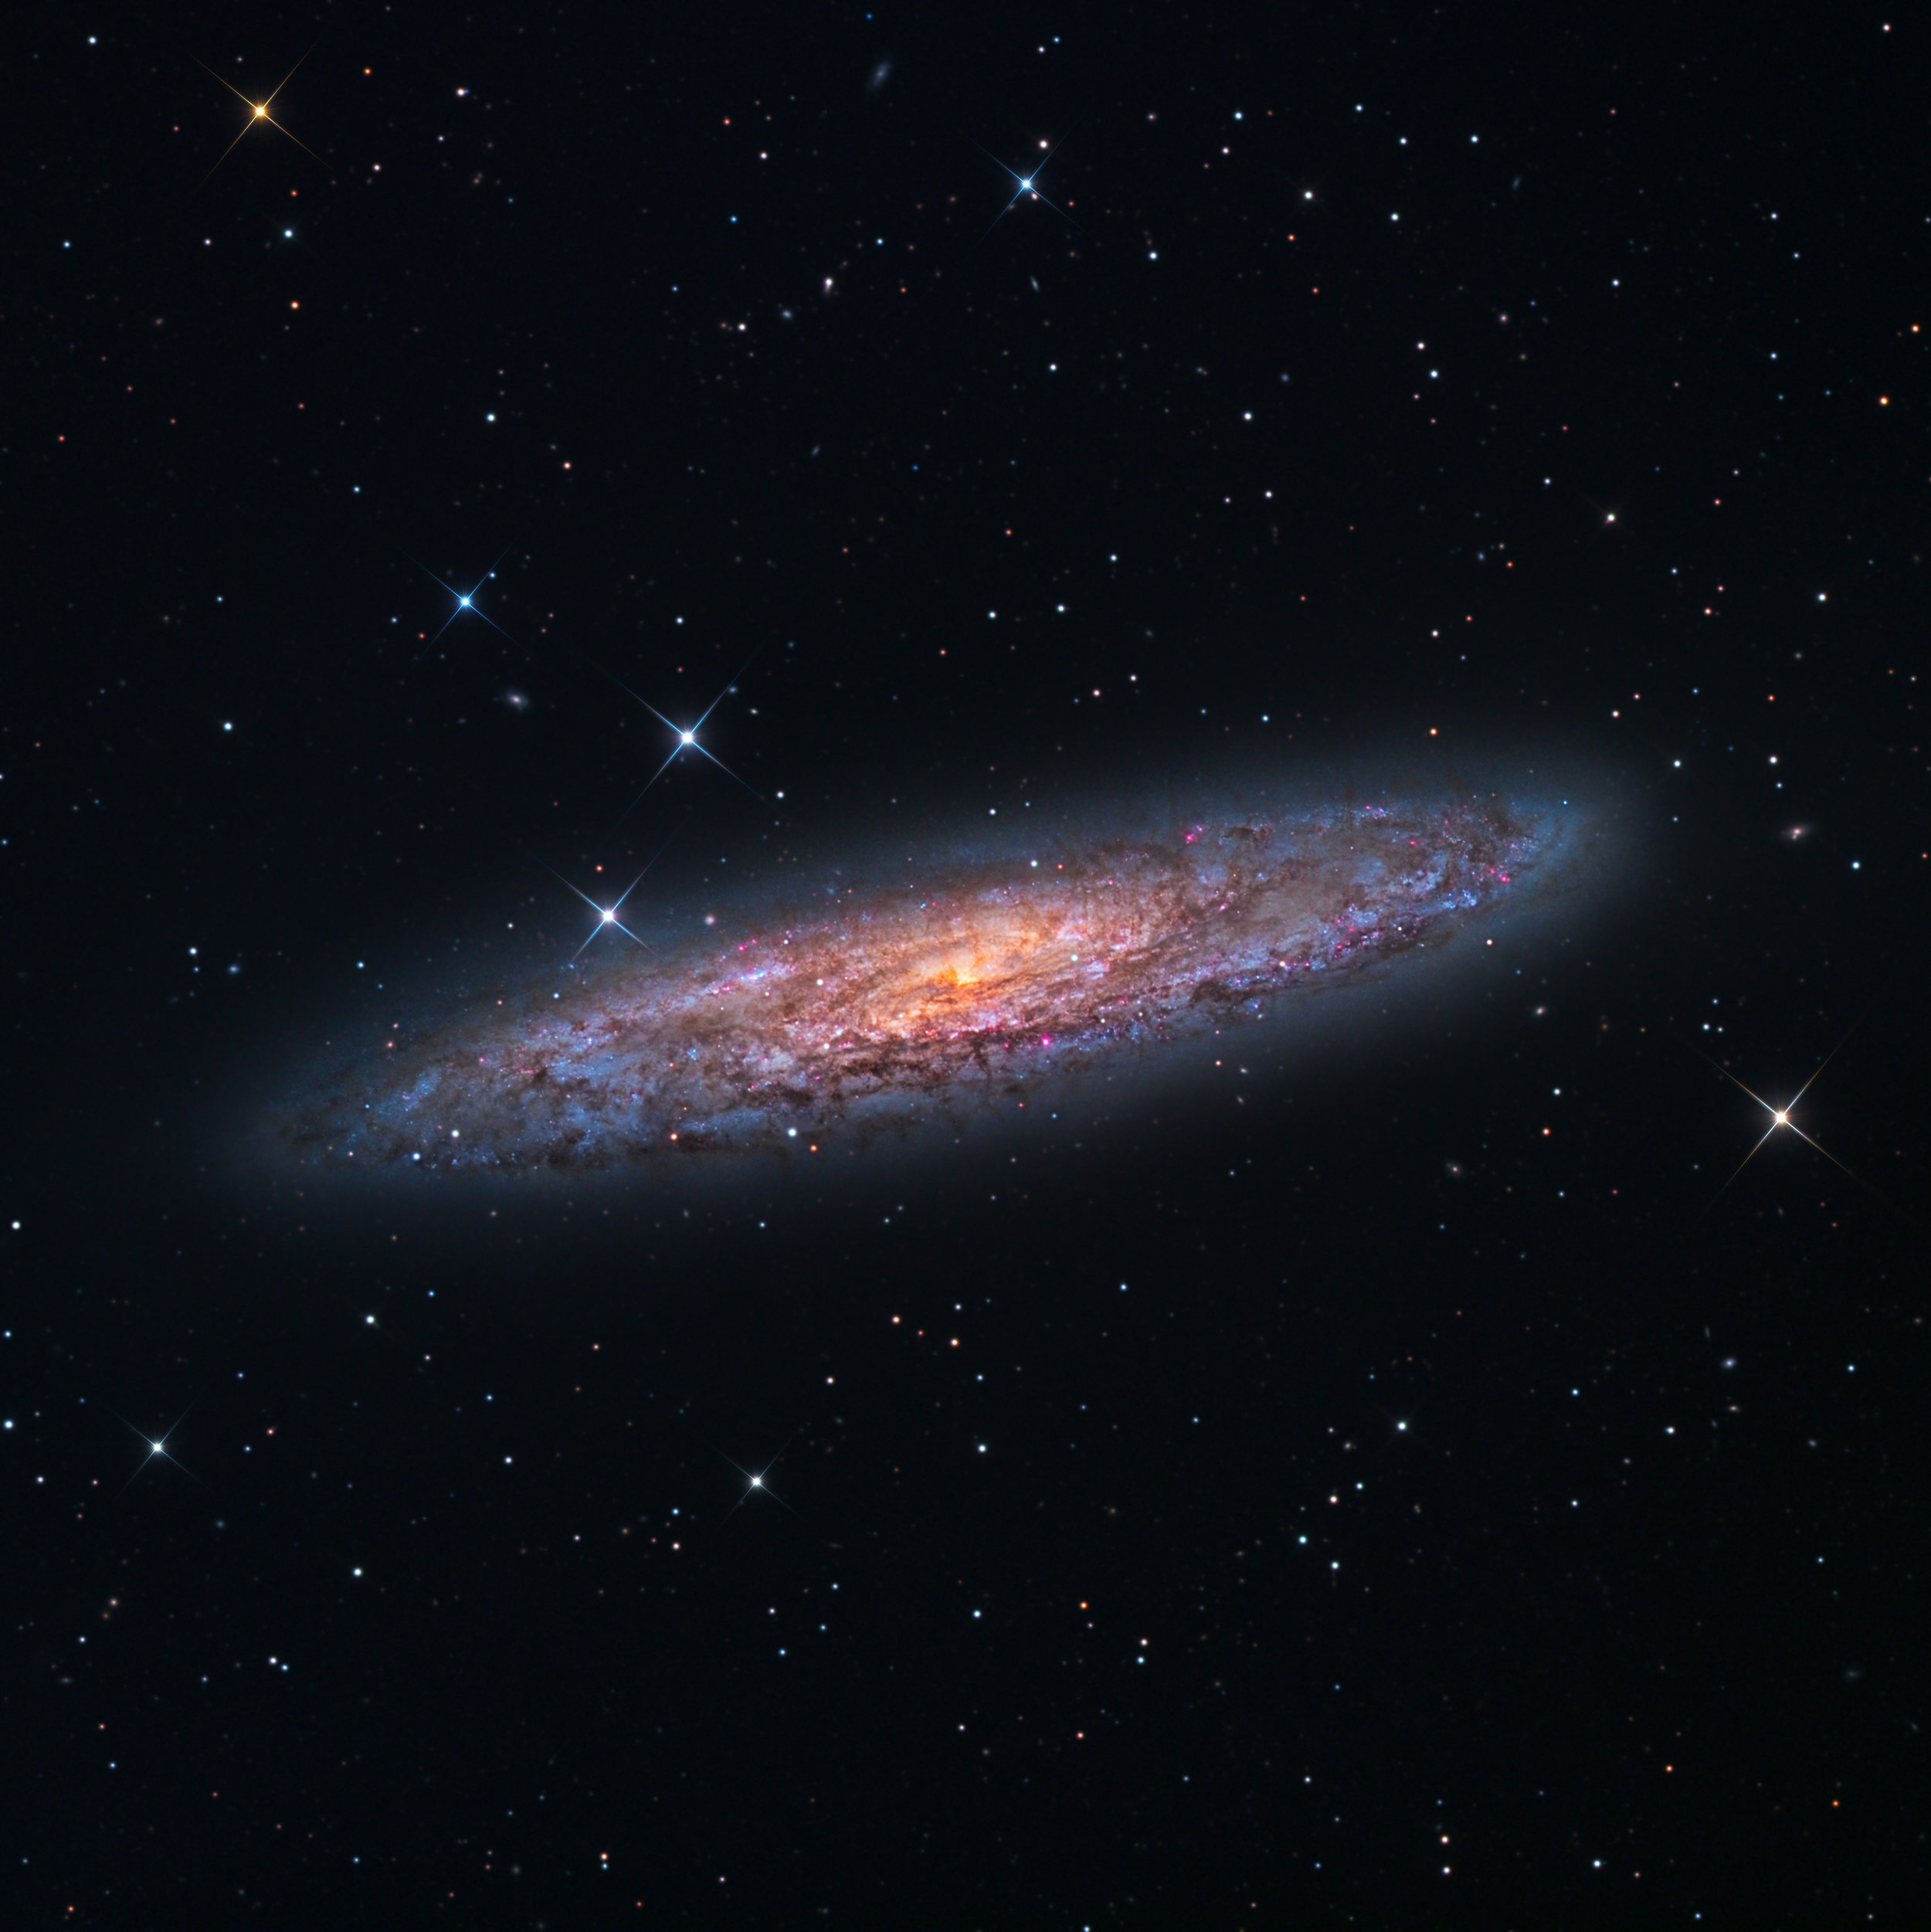 NGC 253 "Stellar Winds Observatory"-DSNM